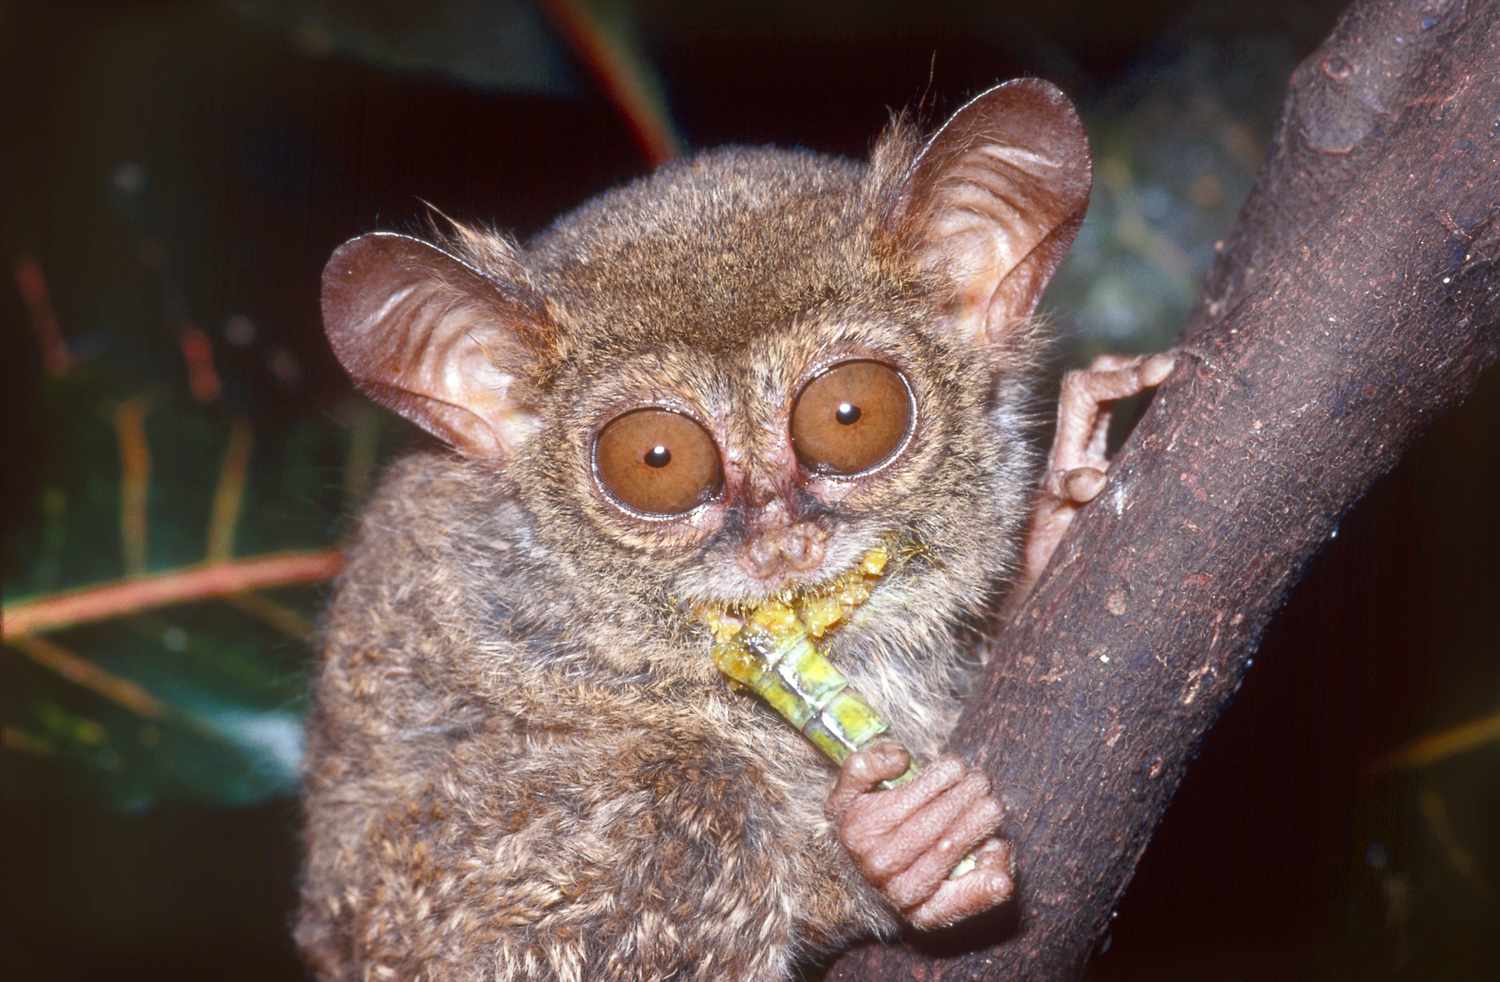 Indonesian tarsier with curly dense coat eating a large yellow bug